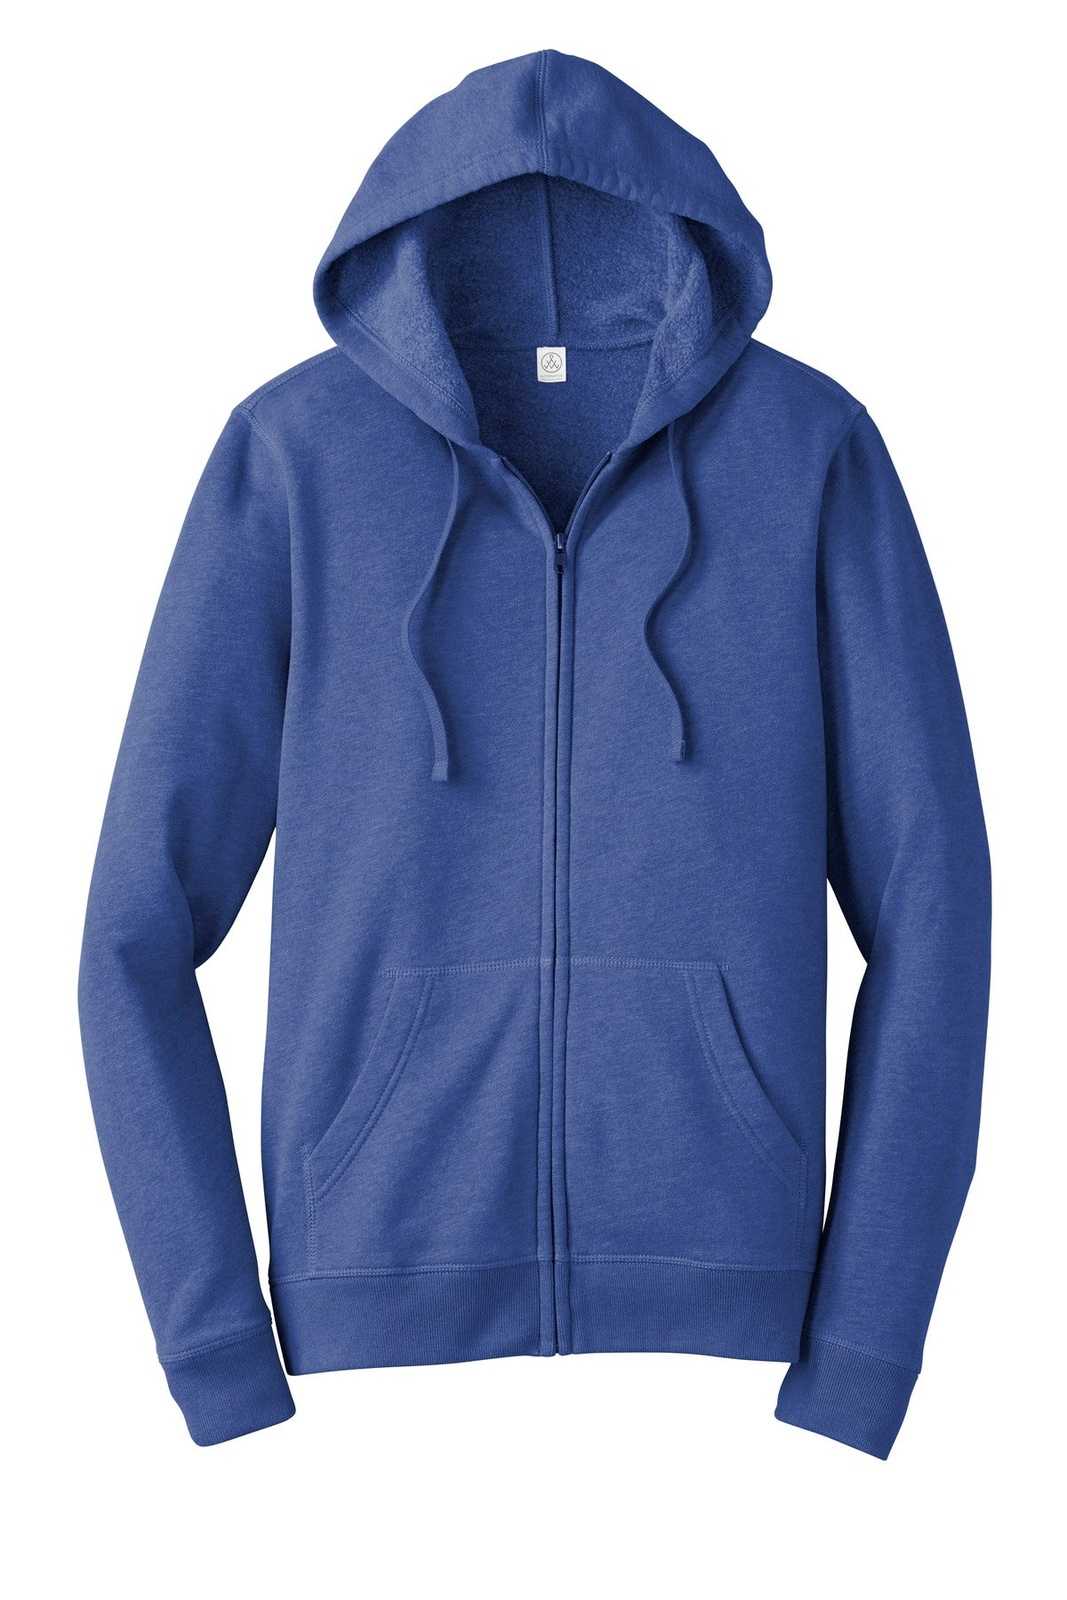 Alternative AA8050 Indy Blended Fleece Zip Hoodie - Heather Rich Royal - HIT a Double - 5